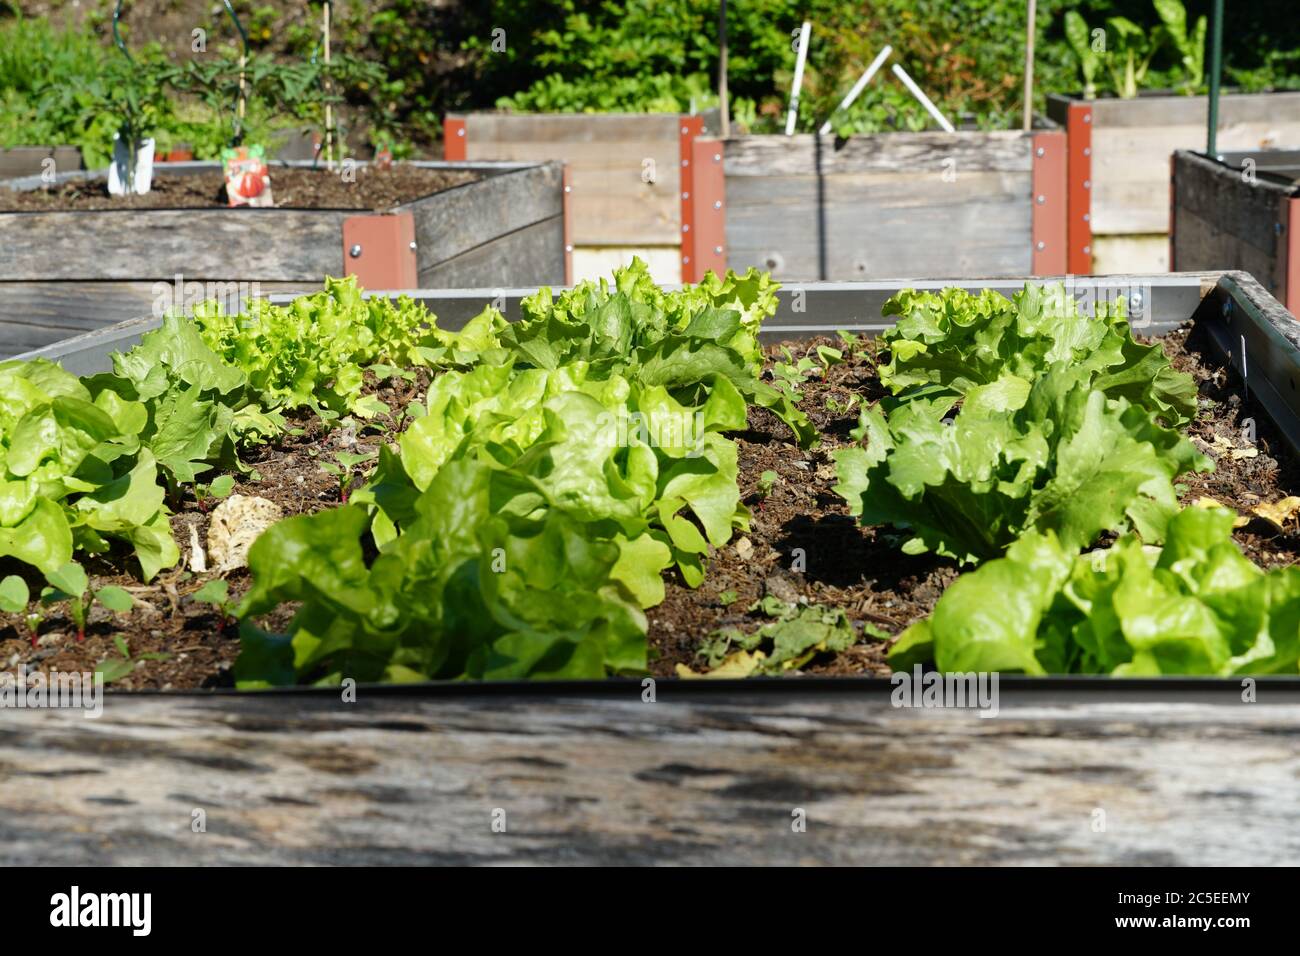 Lettuce cultivation in a micro garden in Urdorf Switzerland. The plants grow in wooden containers and enable hobby gardening on small scale. Stock Photo